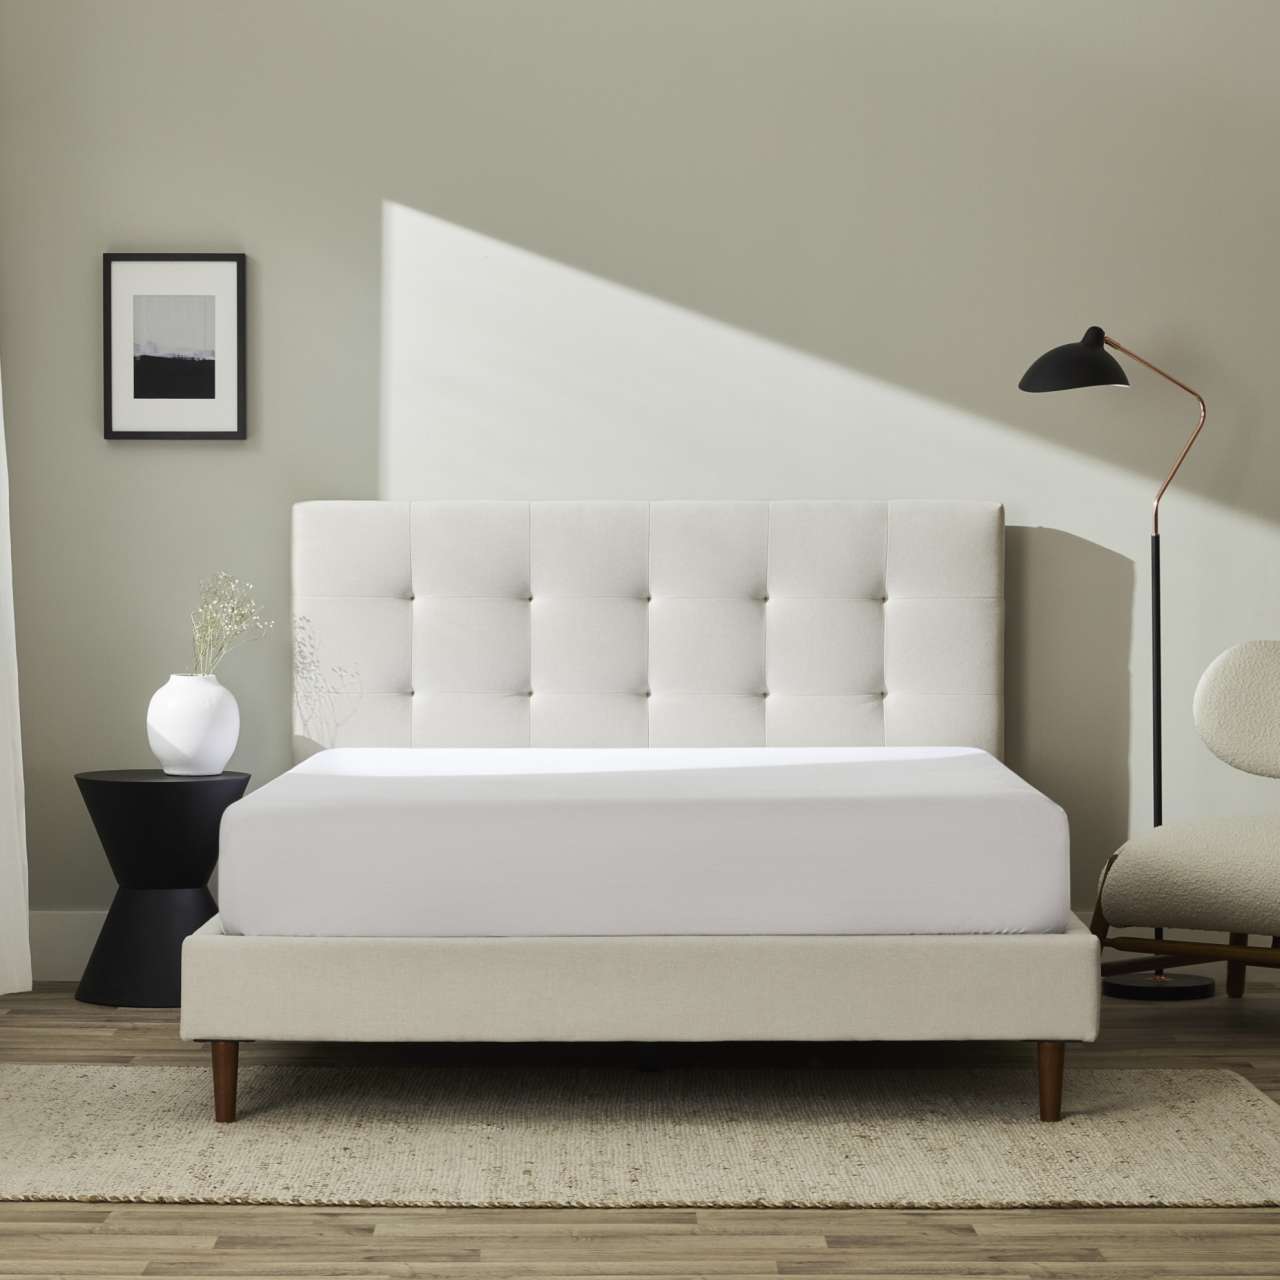 How To Assemble A Bed Frame With Headboard